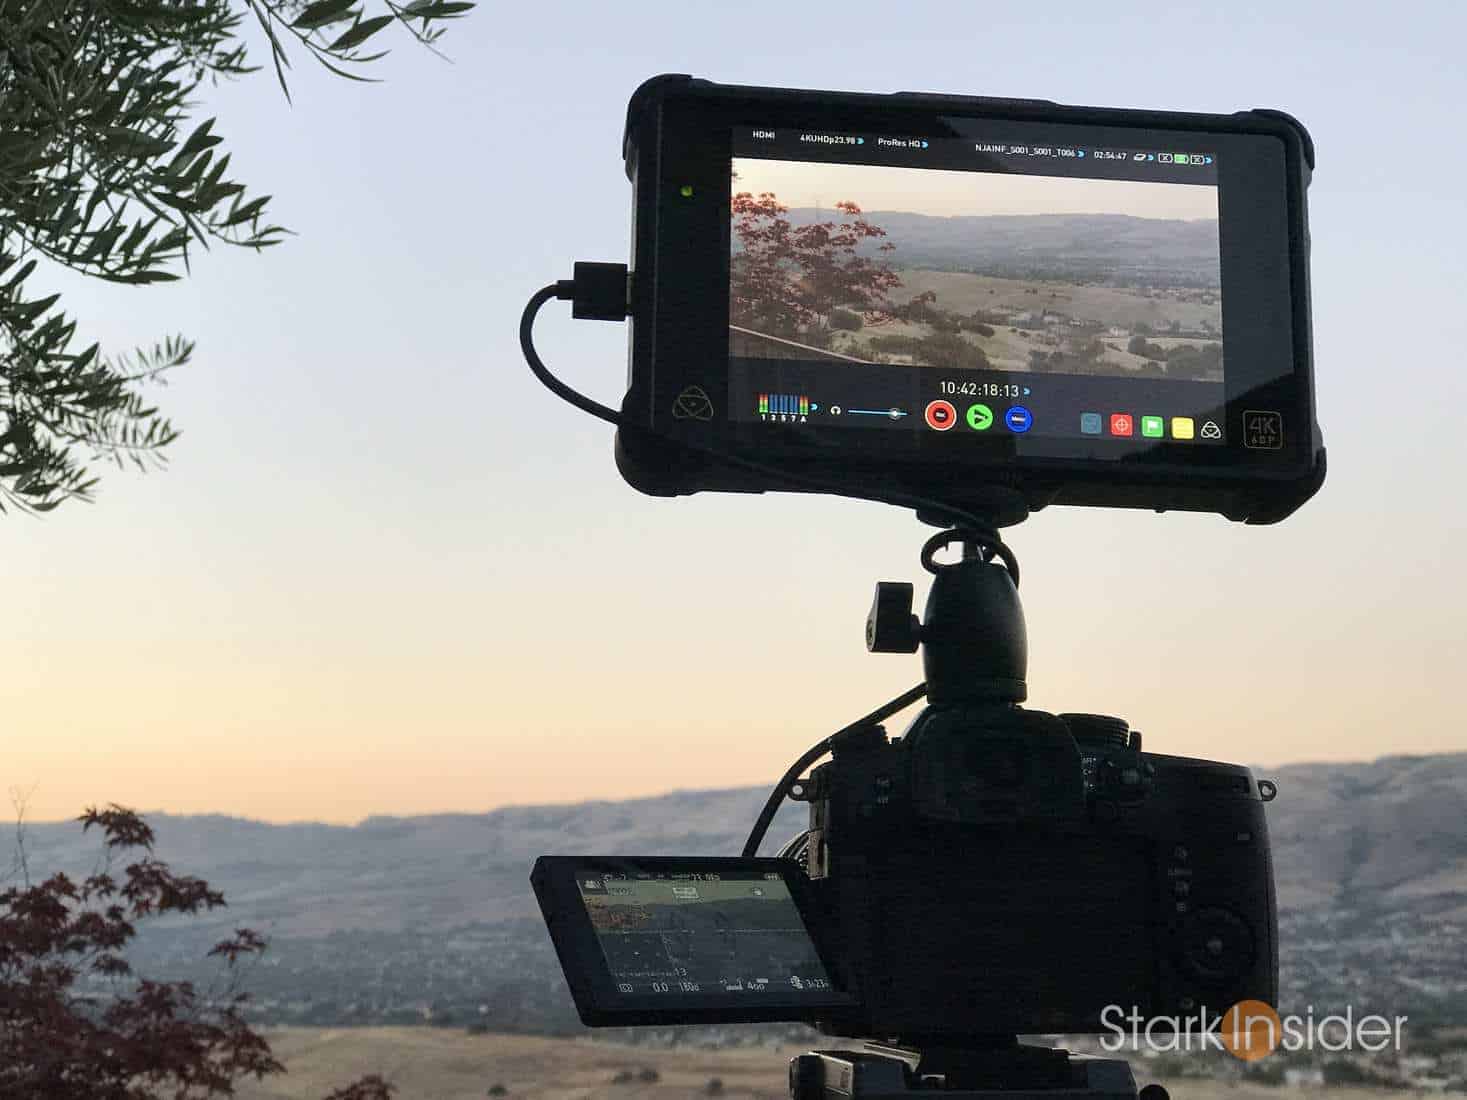 Atomos Ninja V, Inferno recorders will support 4K 10-bit 422 HDR with  Panasonic's Lumix S1: Digital Photography Review